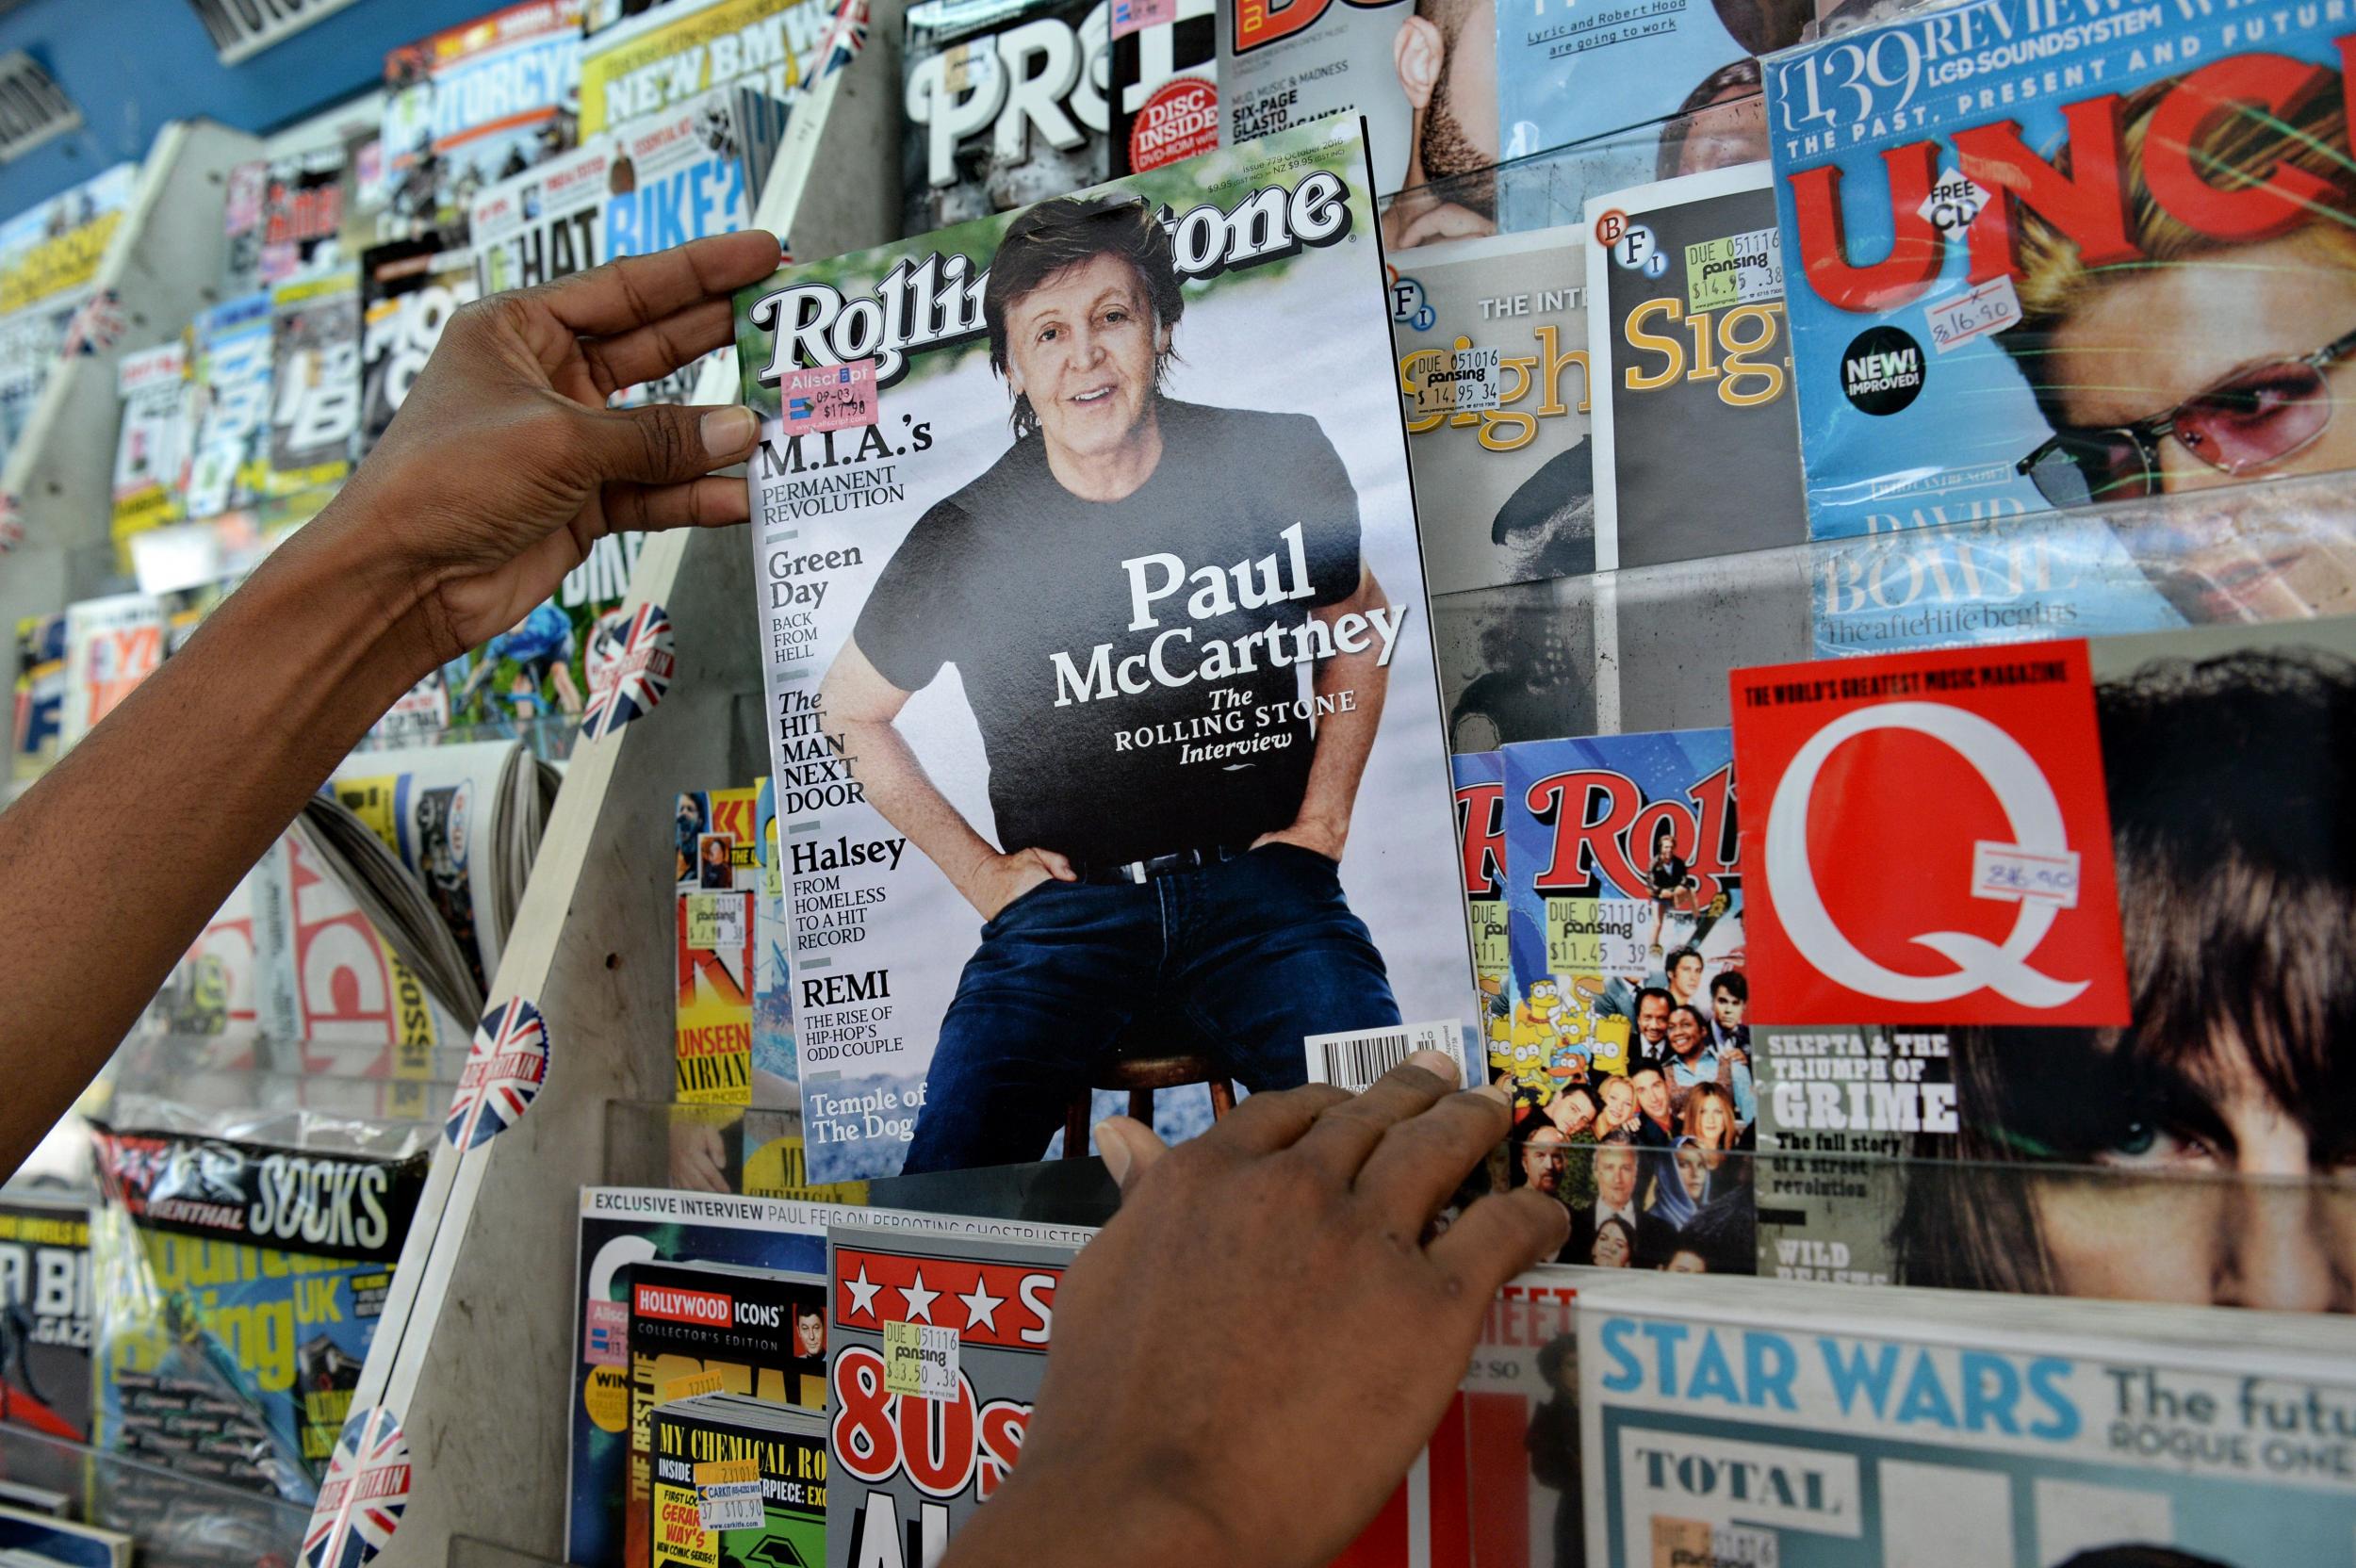 Jann Wenner clung onto older artists Sir Paul McCartney on its covers despite younger artists emerging